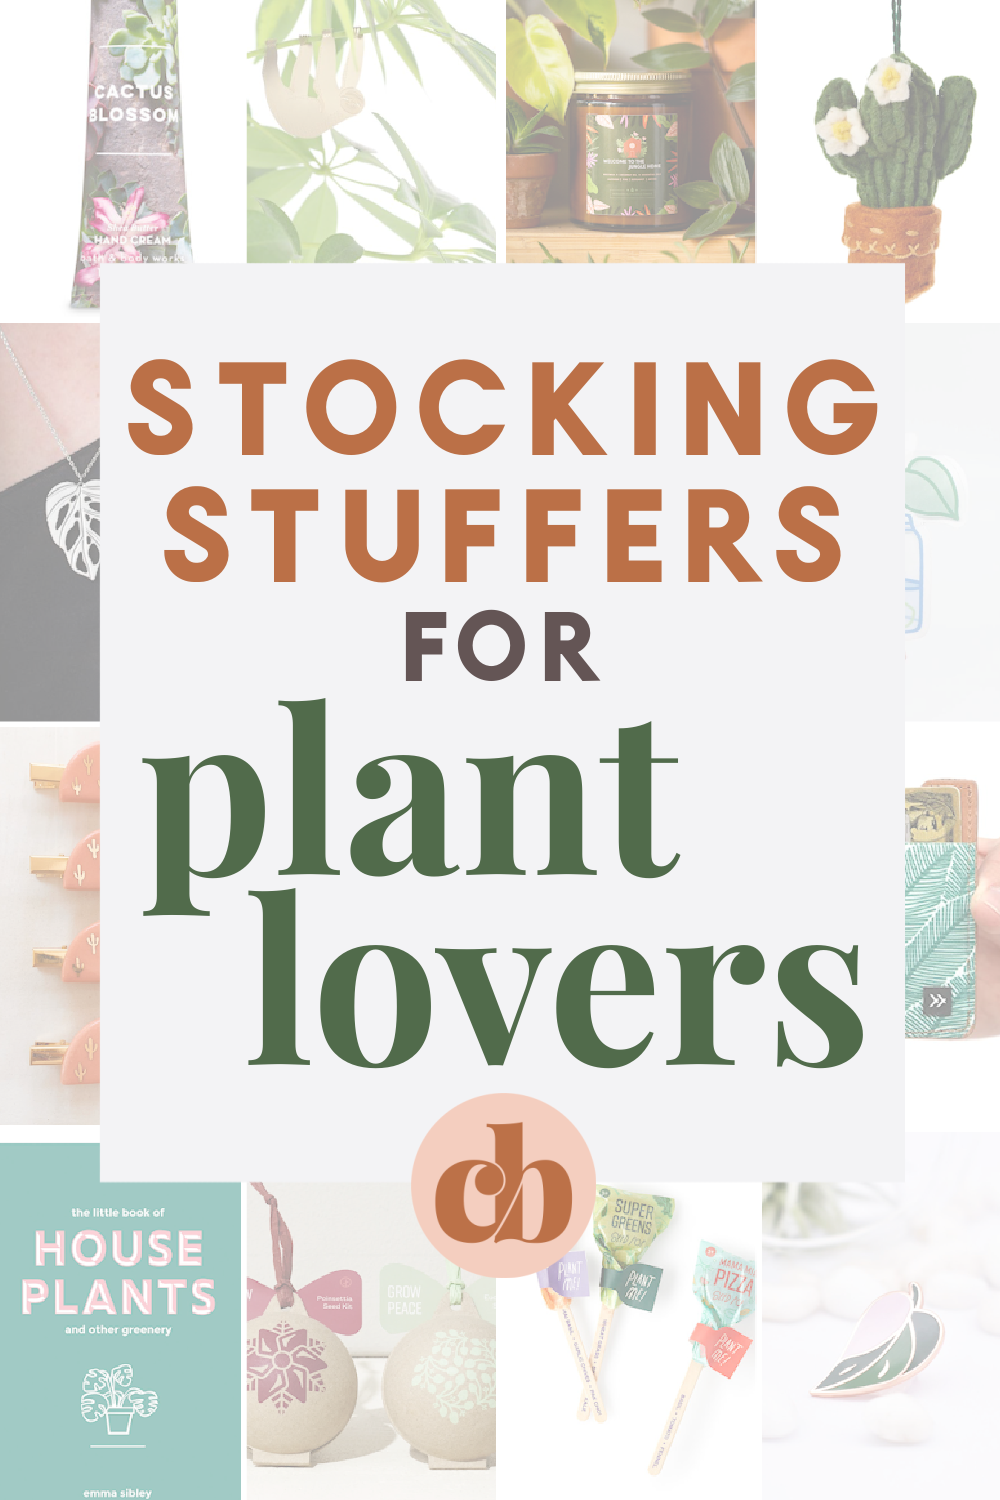 Stocking Stuffers for Plant Lovers - Images of stocking stuffer ideas.